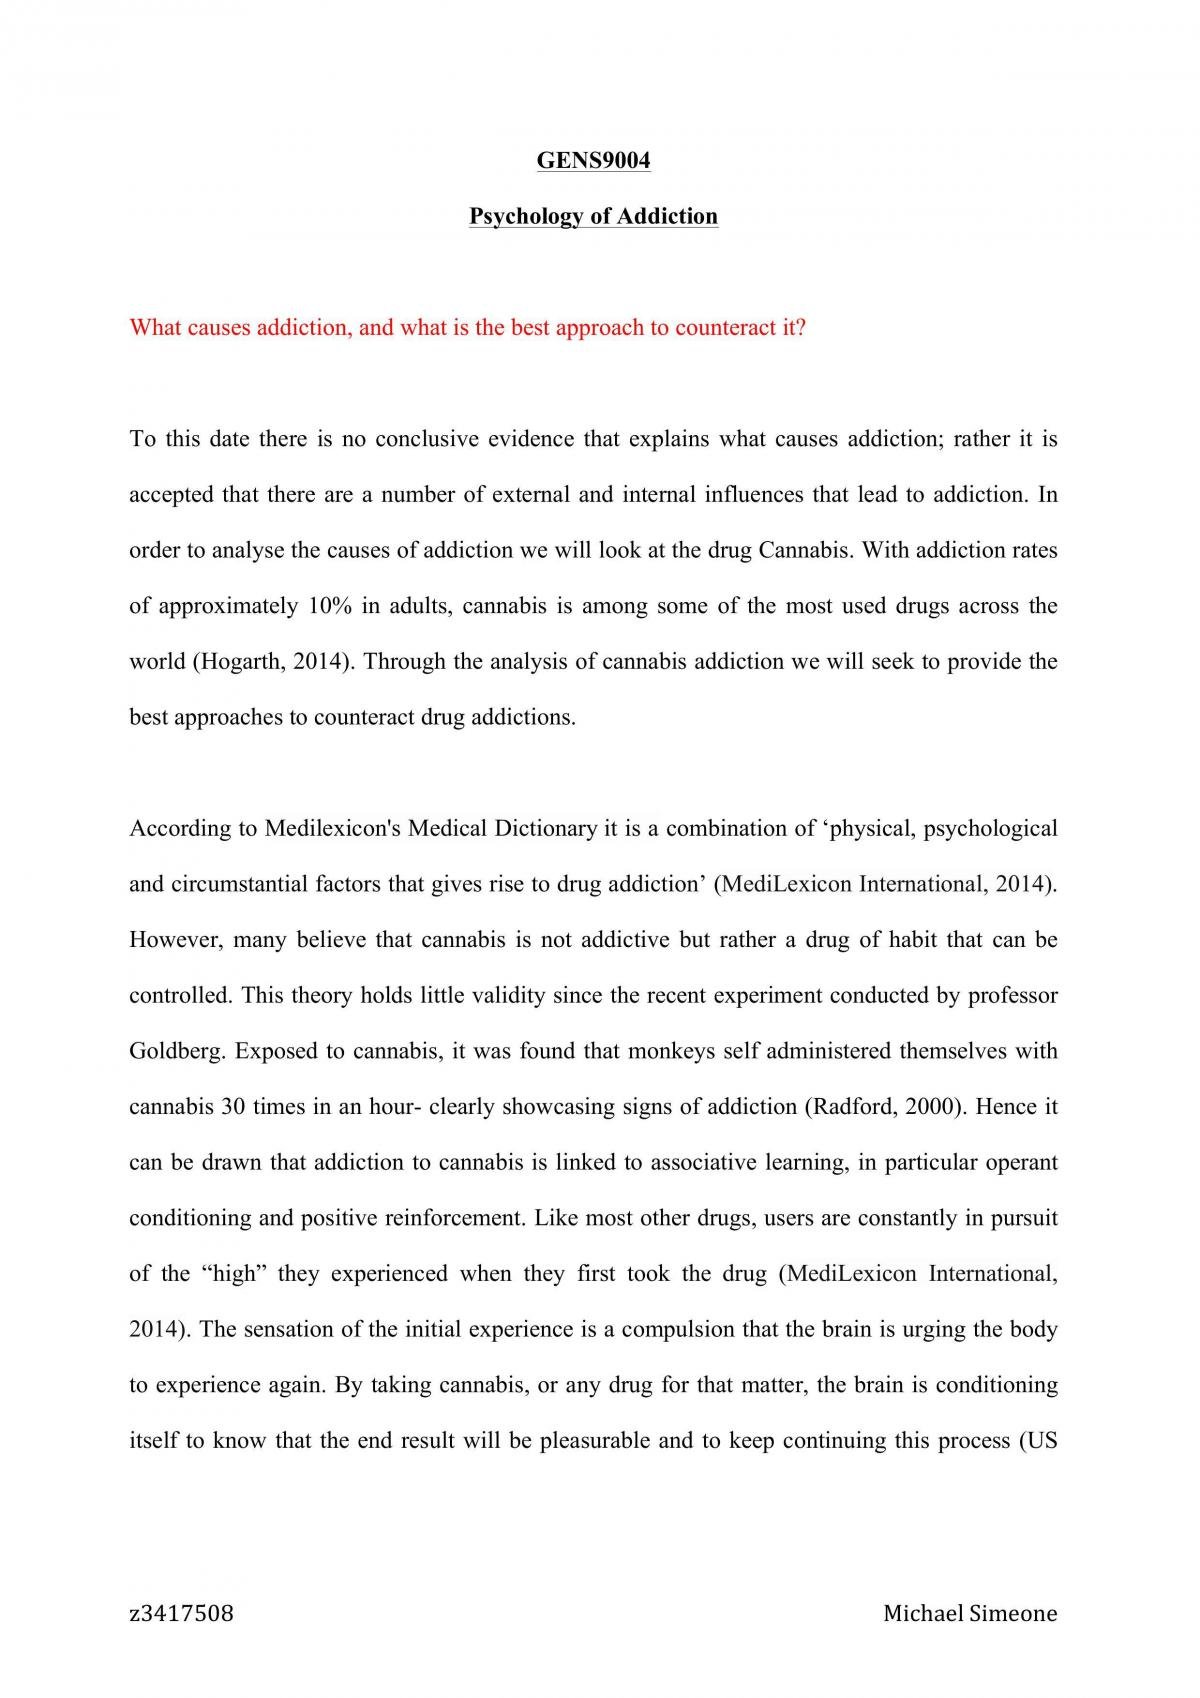 Psychology of Addiction Essay - Page 1